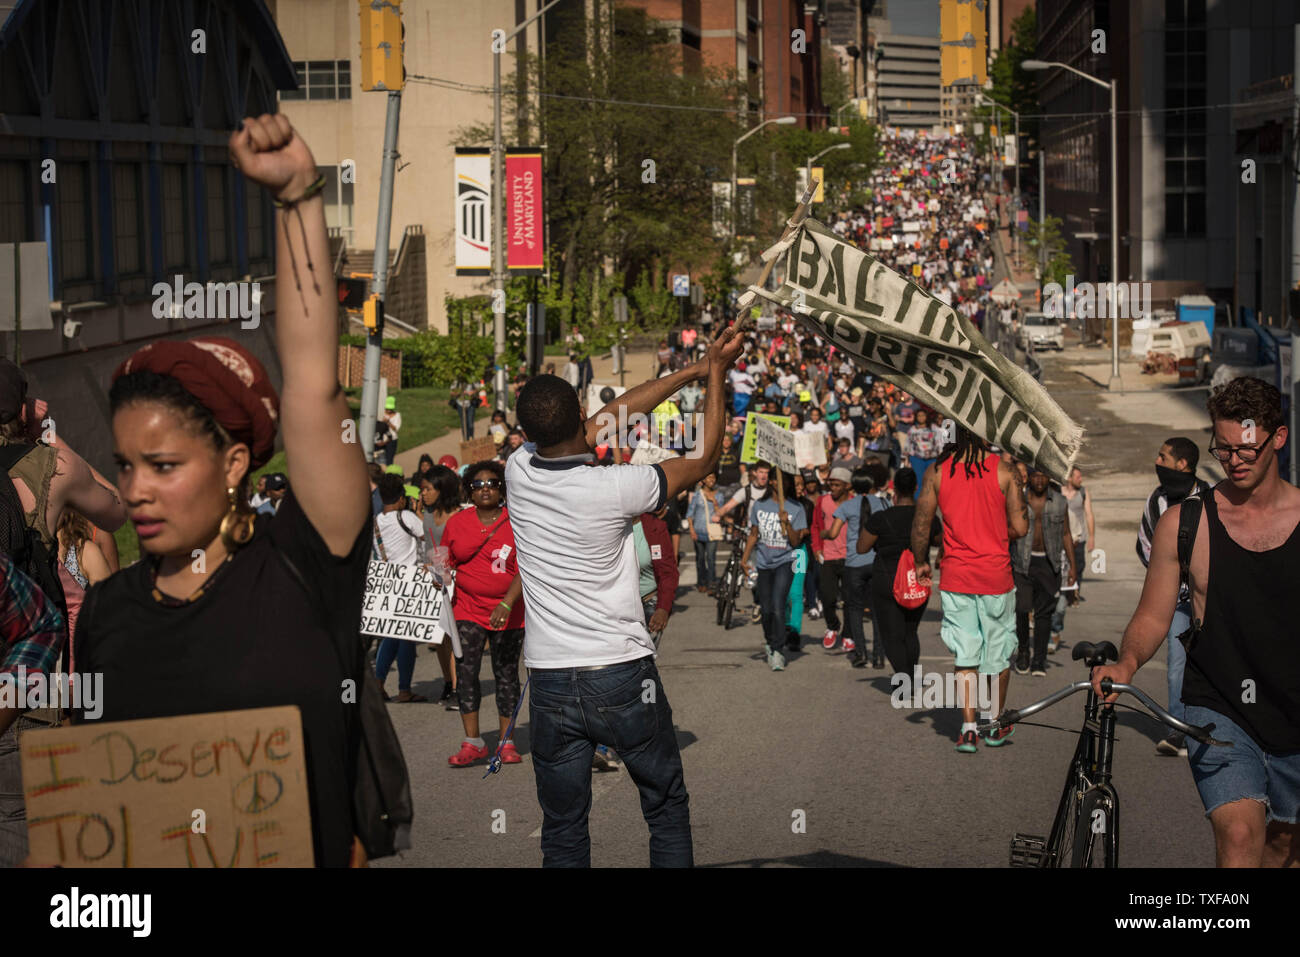 Baltimore residents march in a Massive National Rally of celebration in the streets of Baltimore, MD on May 2, 2015. City State's Attorney ruled the day before that Gray's death was a homicide and that criminal charges would be filed. Gray, 25 was arrested April 12 for possessing a switch blade knife near the Gilmore Housing project. Gray died a week later from a severe spinal cord injury received while in police custody.    Photo by Ken Cedeno/UPI Stock Photo